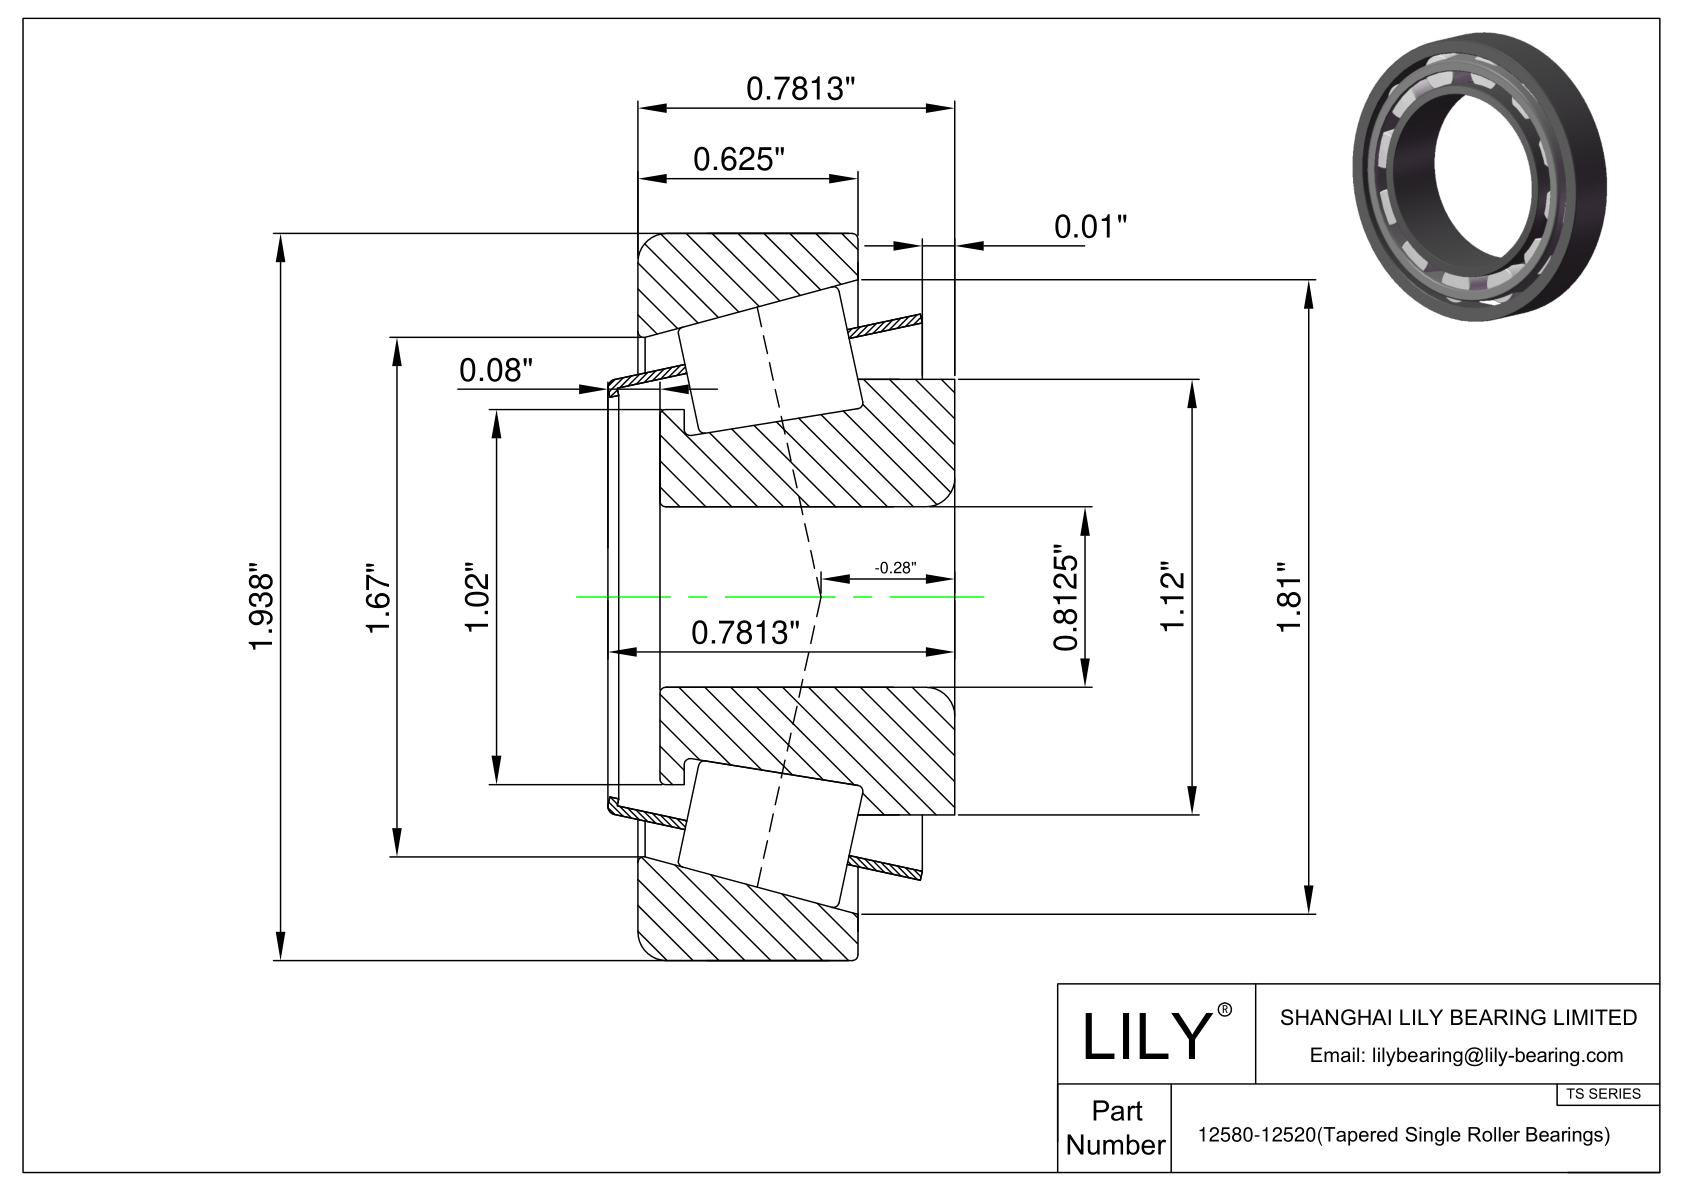 12580-12520 TS (Tapered Single Roller Bearings) (Imperial) cad drawing